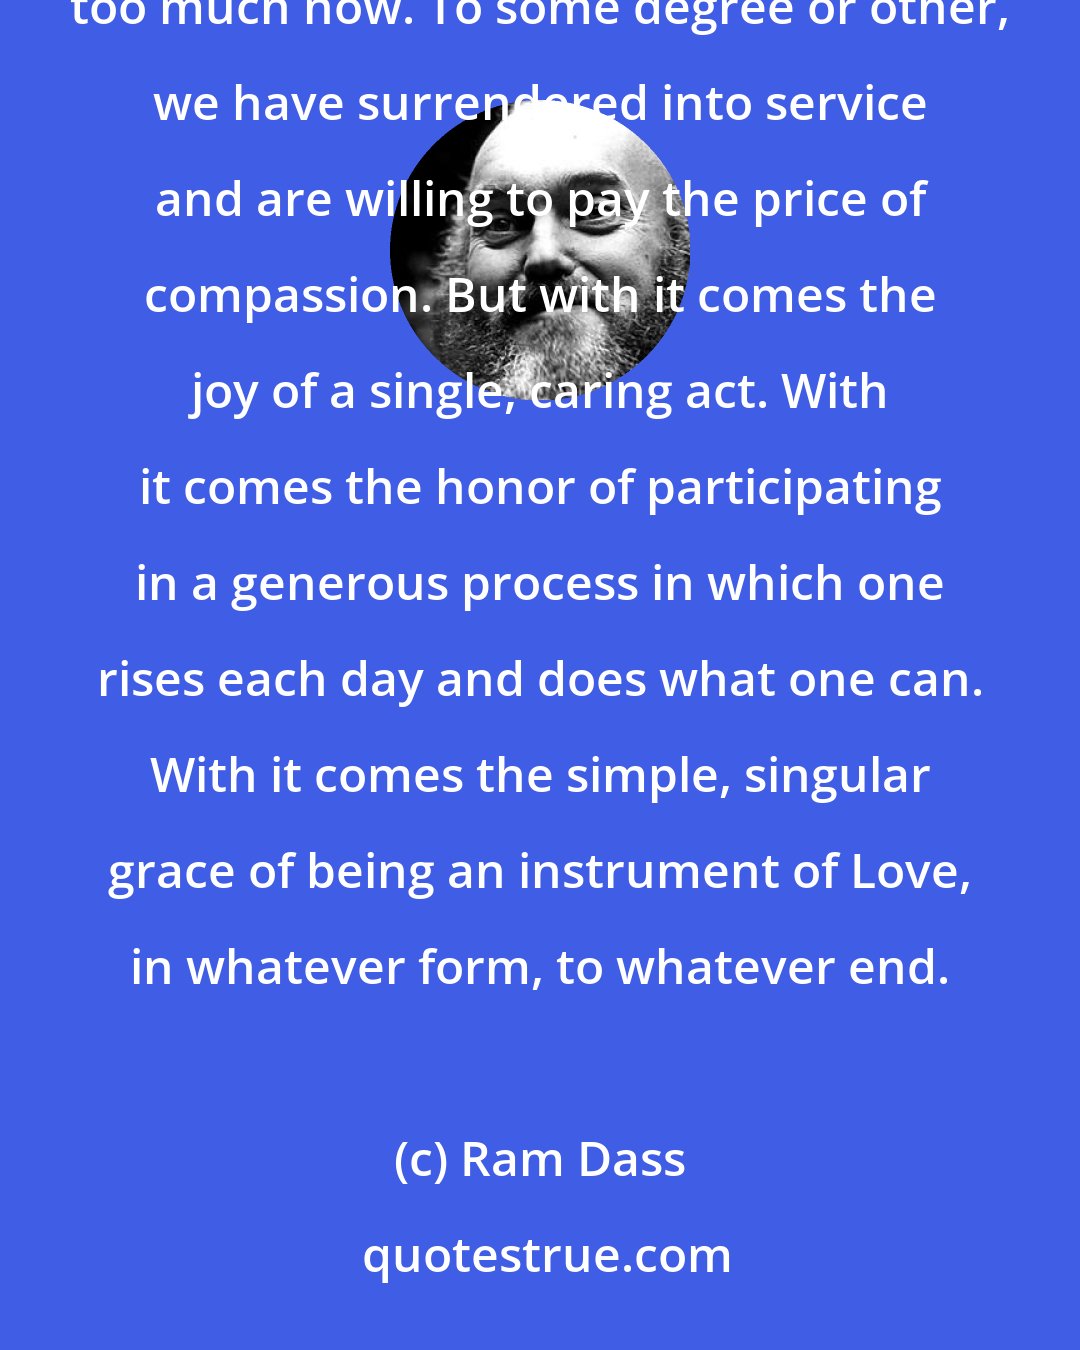 Ram Dass: The pain of the world will sear and break our hearts because we can no longer keep them closed. We've seen too much now. To some degree or other, we have surrendered into service and are willing to pay the price of compassion. But with it comes the joy of a single, caring act. With it comes the honor of participating in a generous process in which one rises each day and does what one can. With it comes the simple, singular grace of being an instrument of Love, in whatever form, to whatever end.